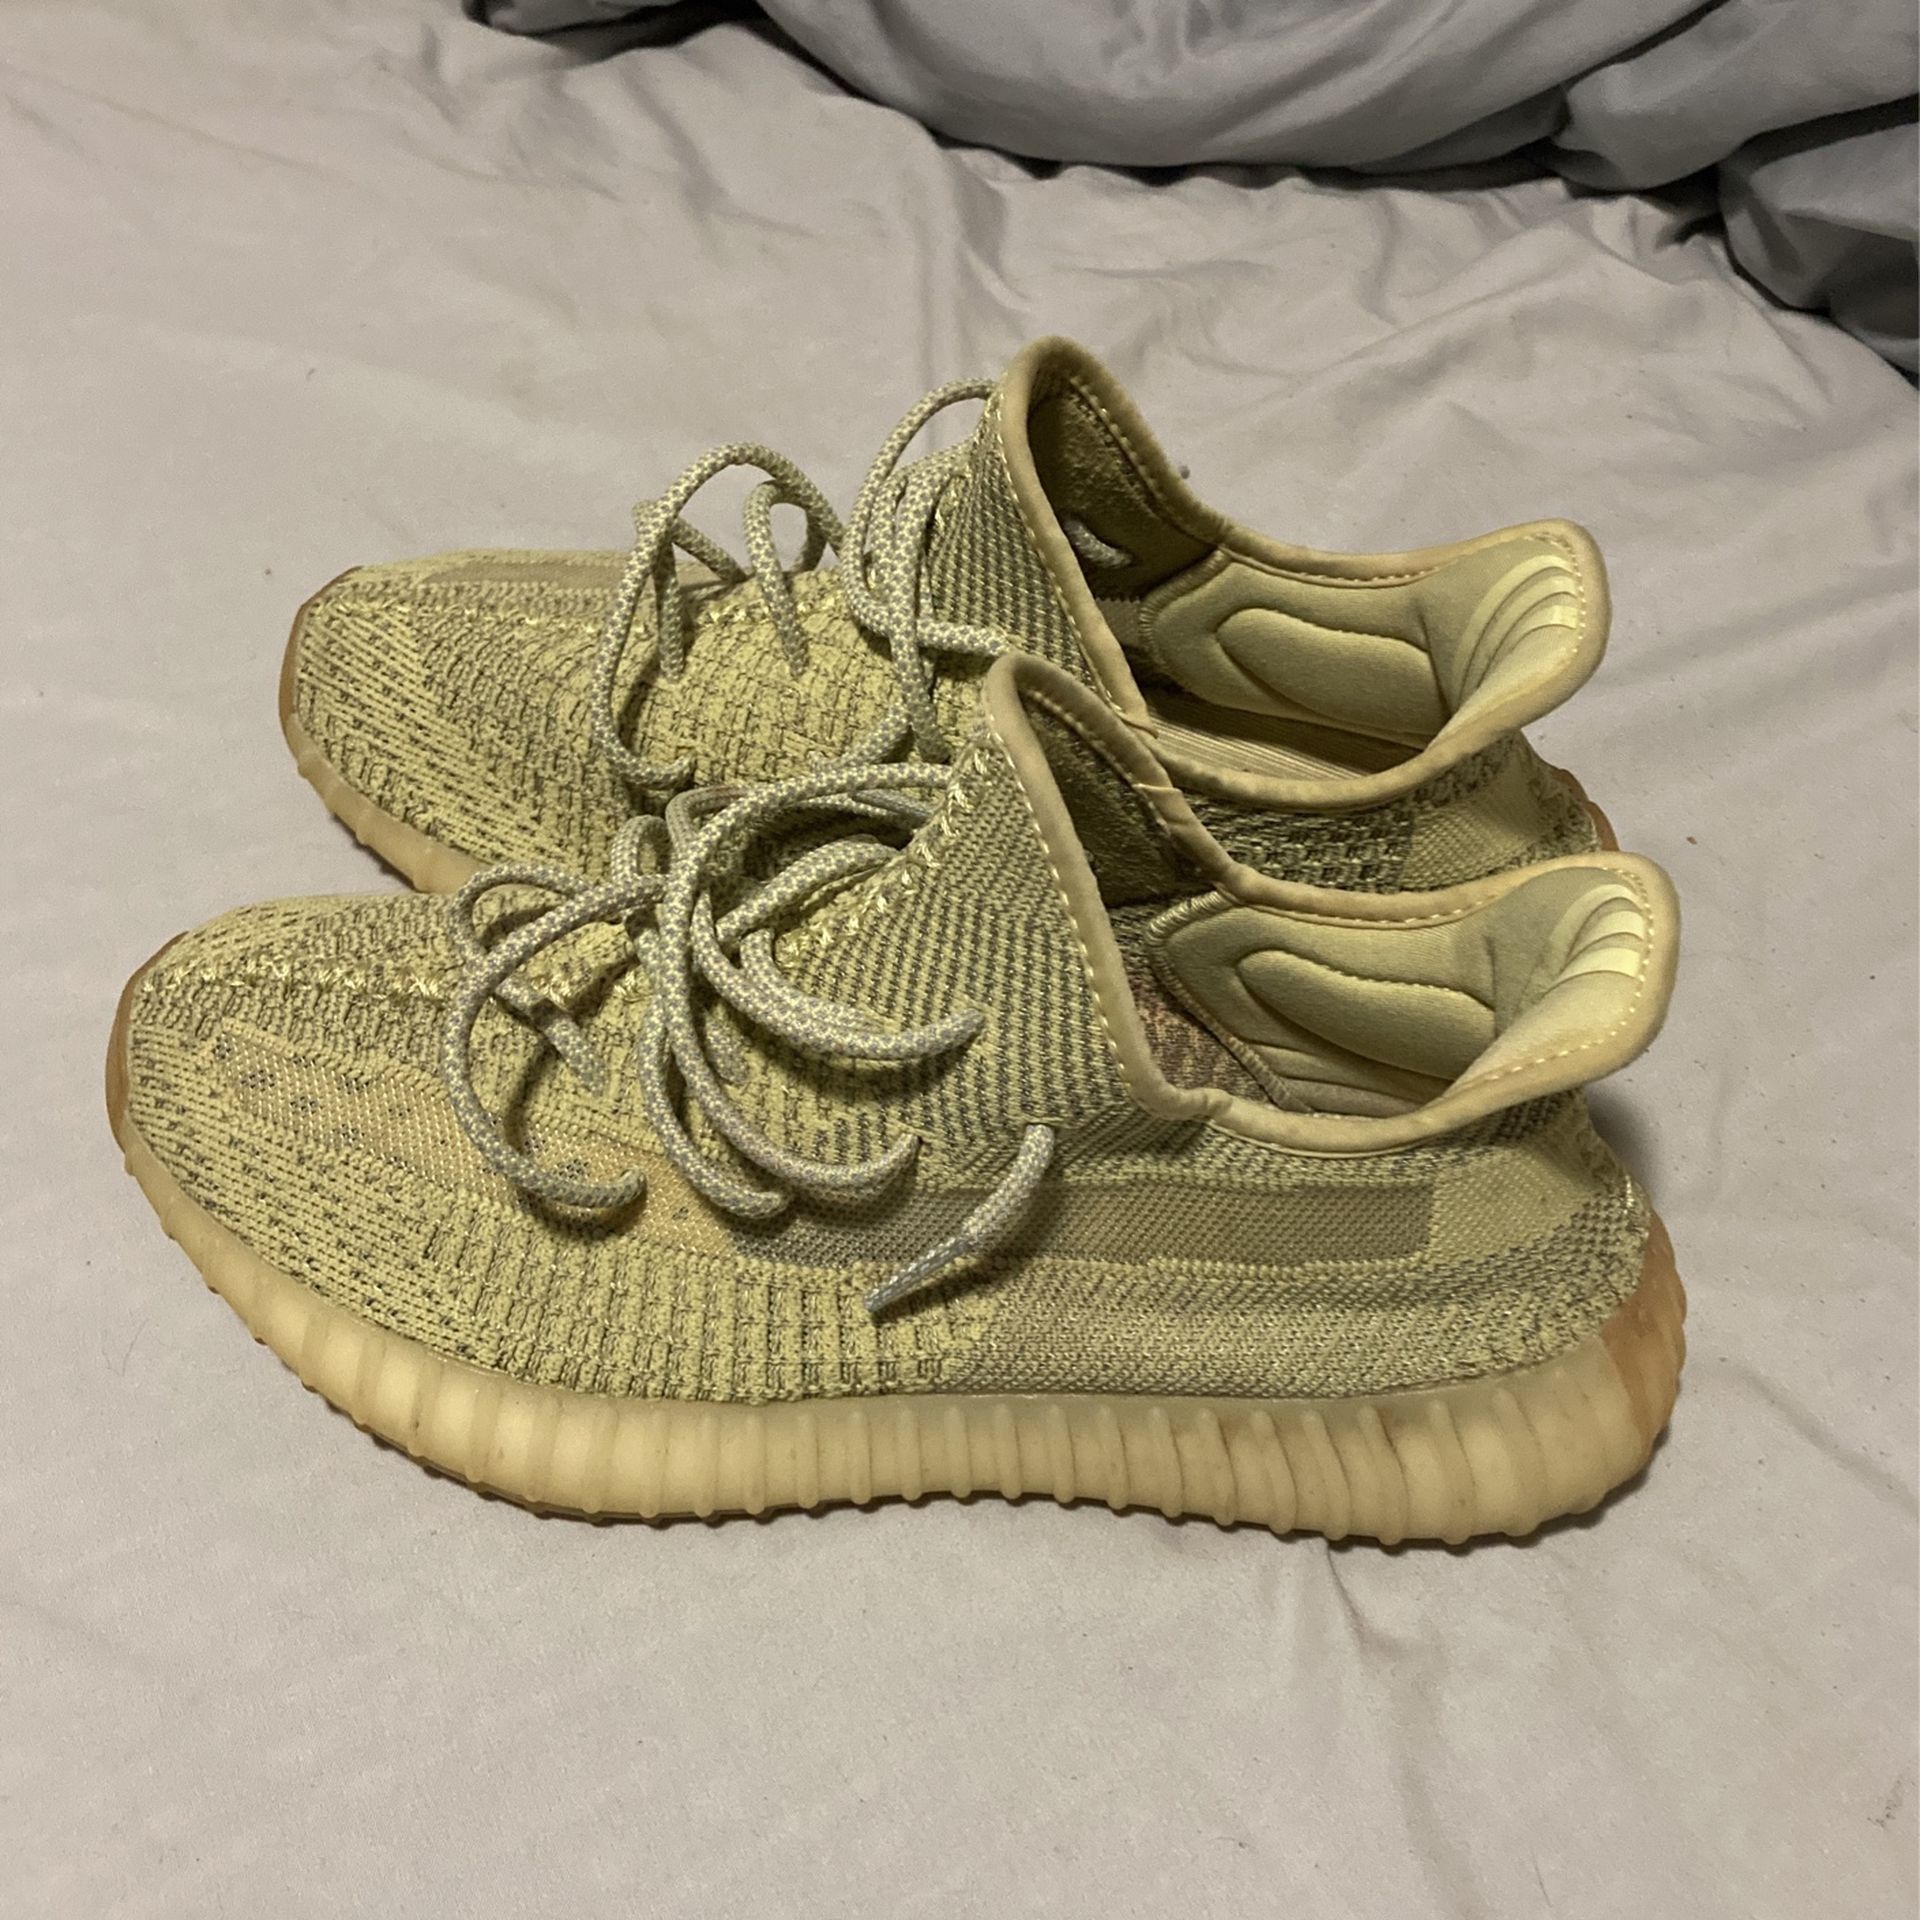 Adidas Yeezy Boost 350 V2 (reflective laces) Size 10